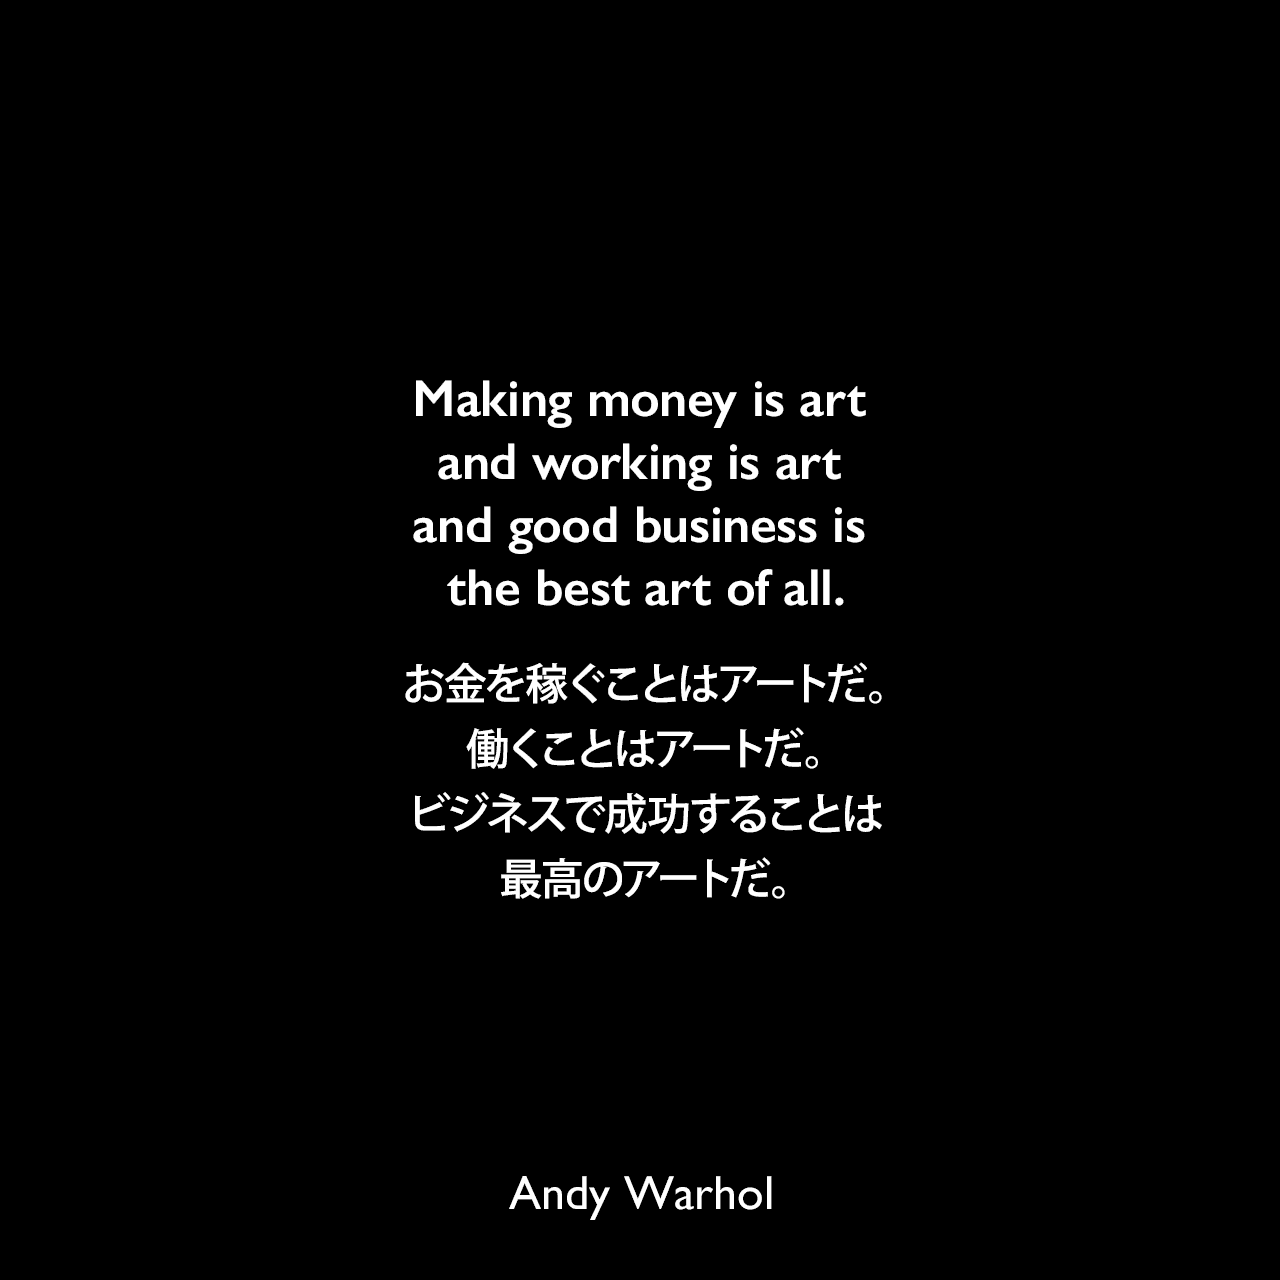 Making money is art and working is art and good business is the best art of all.お金を稼ぐことはアートだ。働くことはアートだ。ビジネスで成功することは最高のアートだ。Andy Warhol